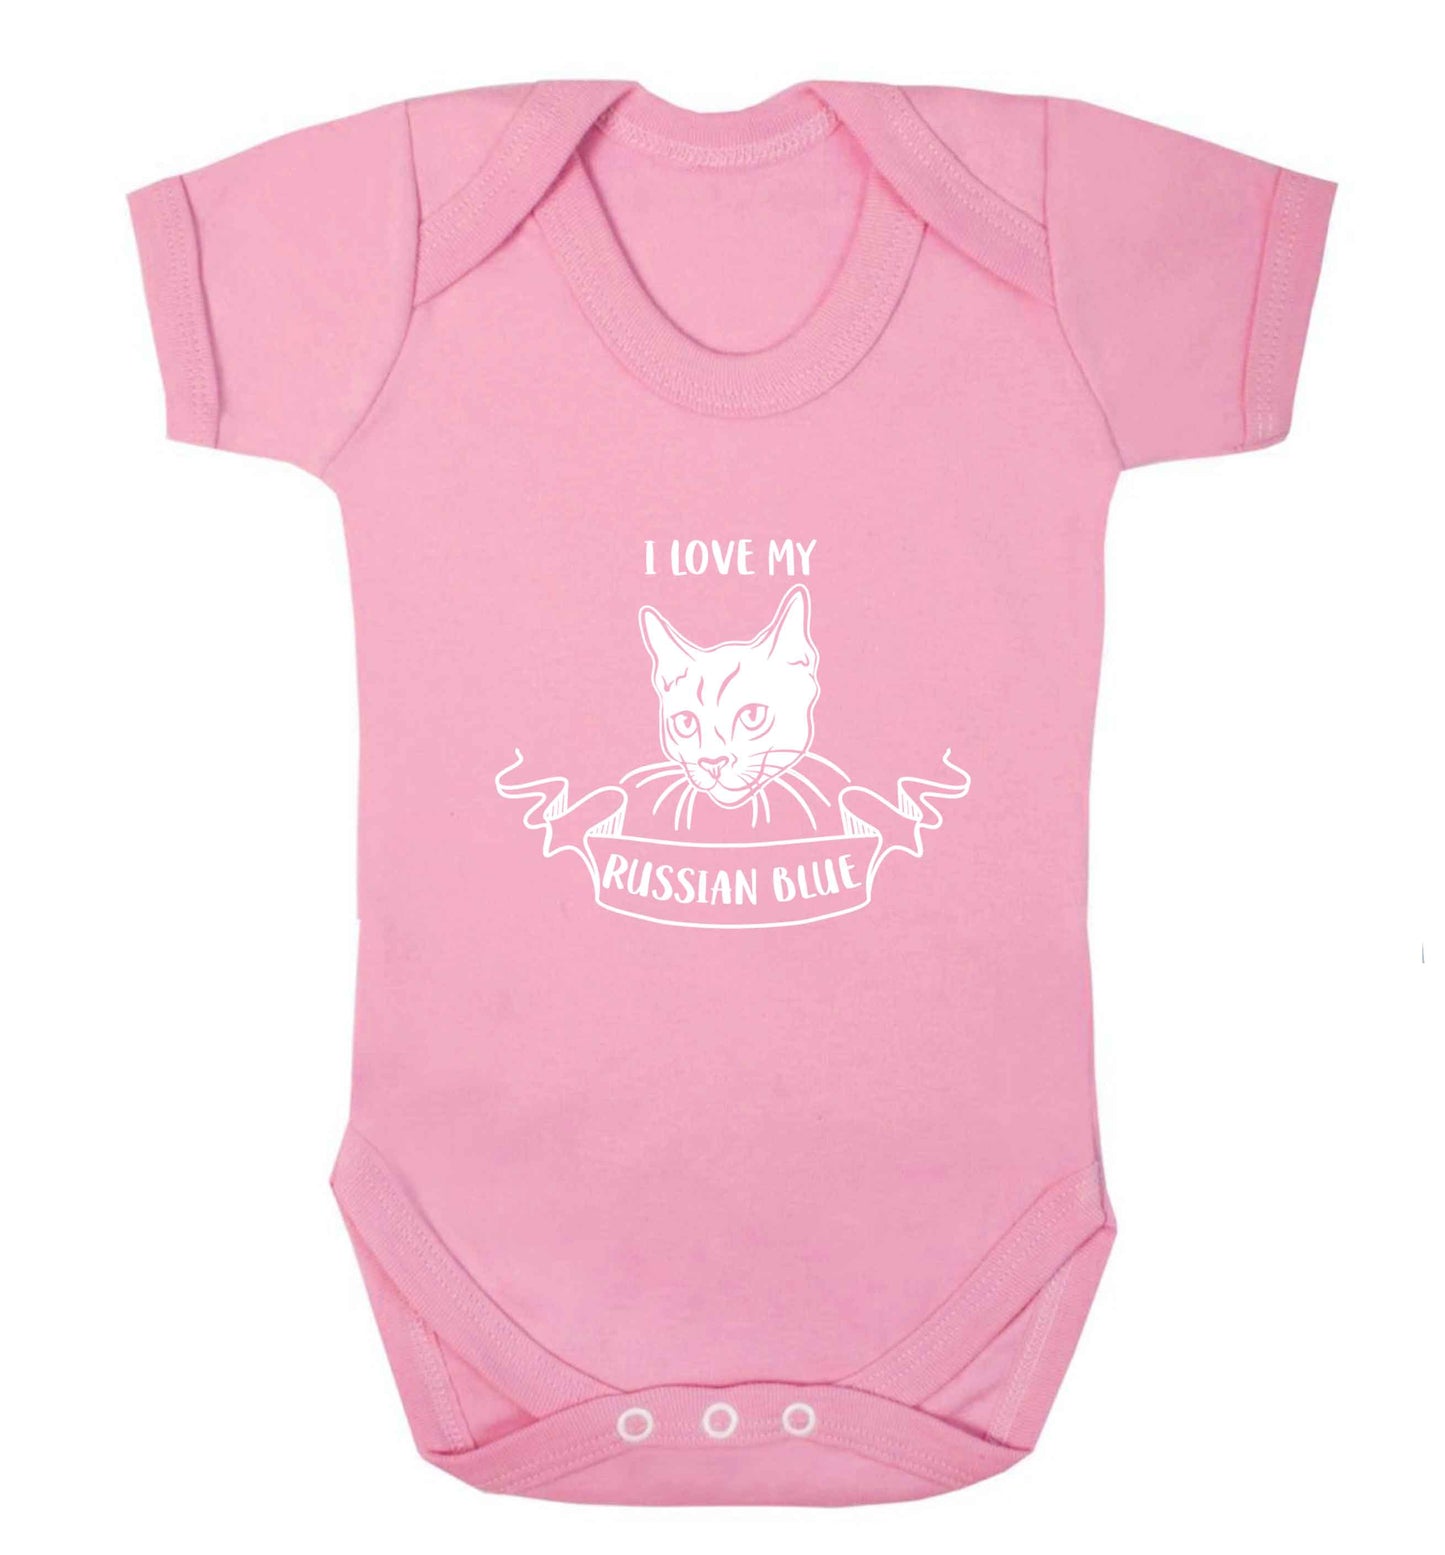 I love my russian blue baby vest pale pink 18-24 months